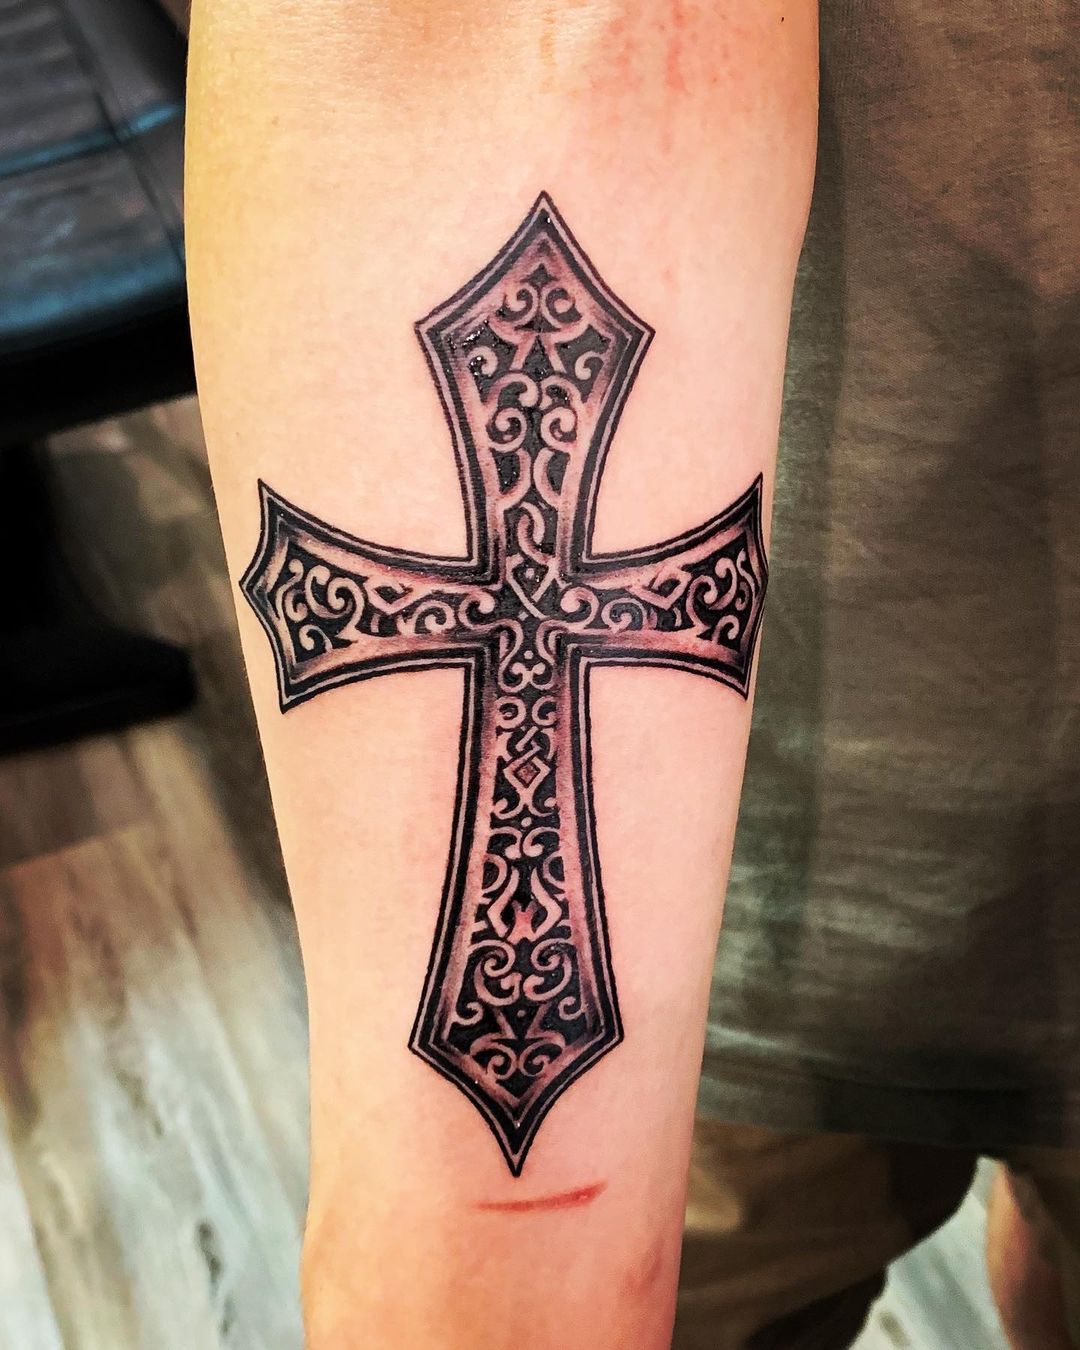 Pointed Passion Cross Tattoos with Celtic Cross Tattoo Designs Inside, Cross Tattoos